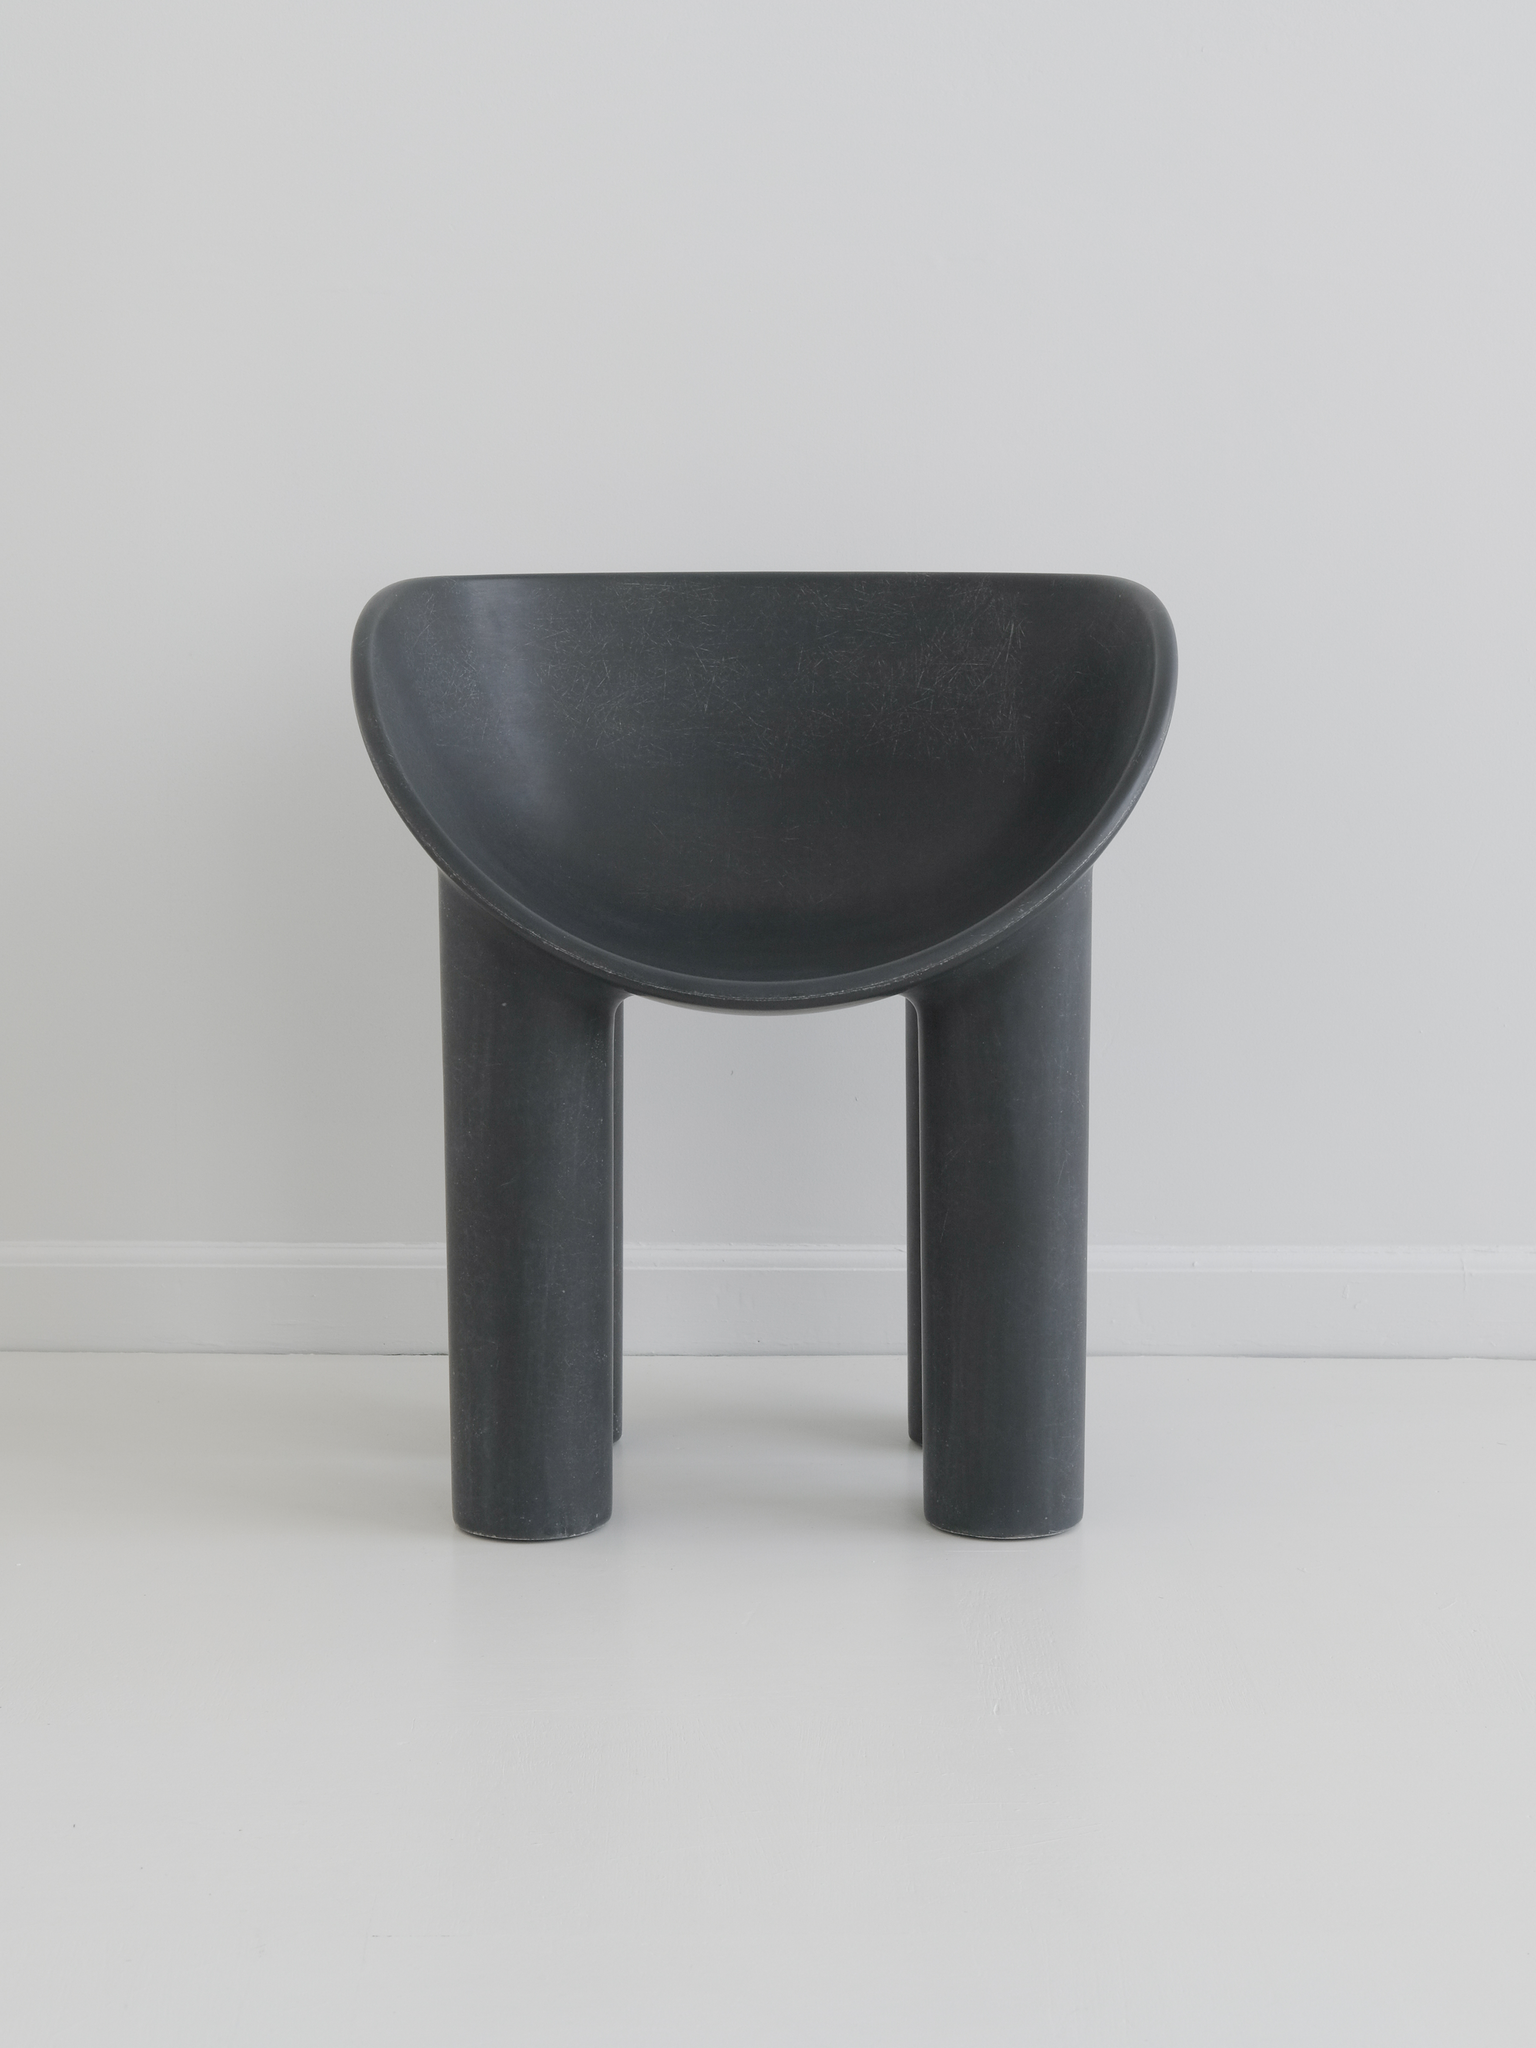 Faye Toogood Roly Poly Chair - Rue Verte